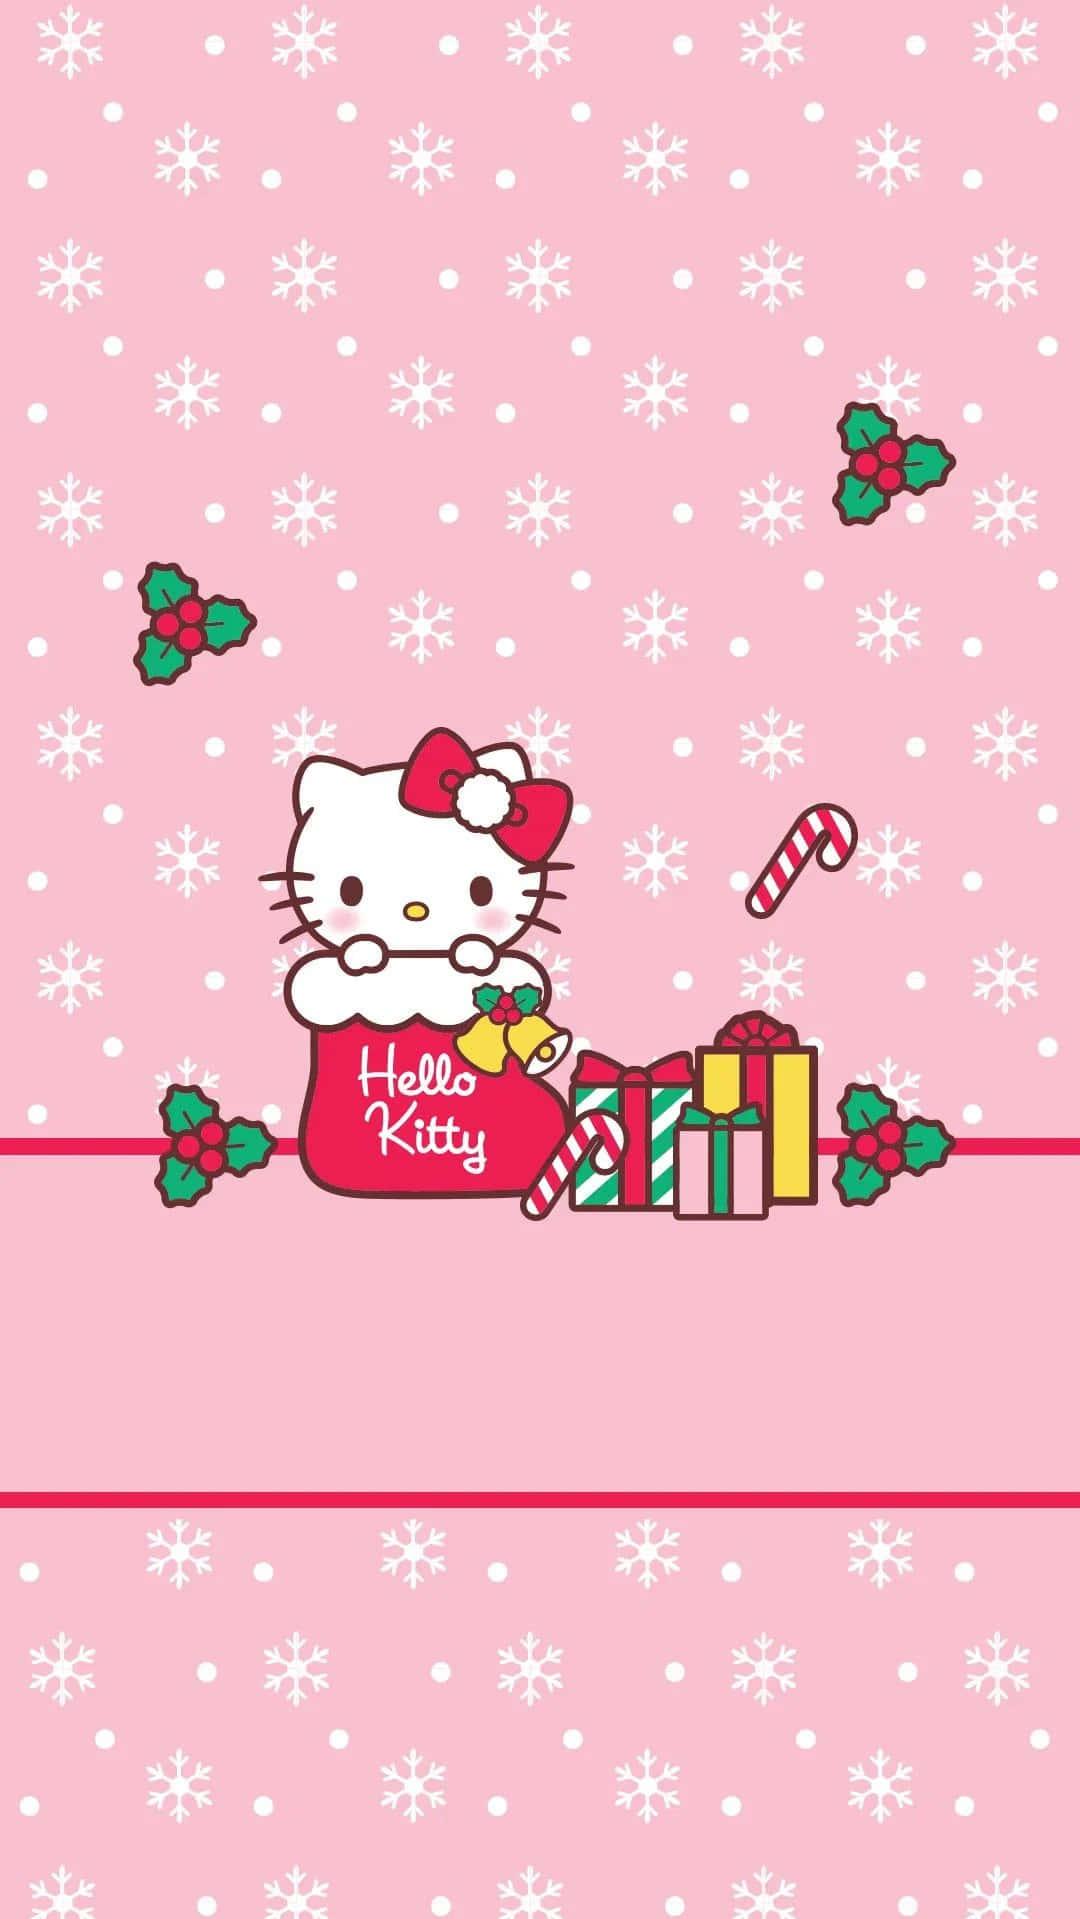 Download Enjoy the Holiday season with Hello Kitty Wallpaper